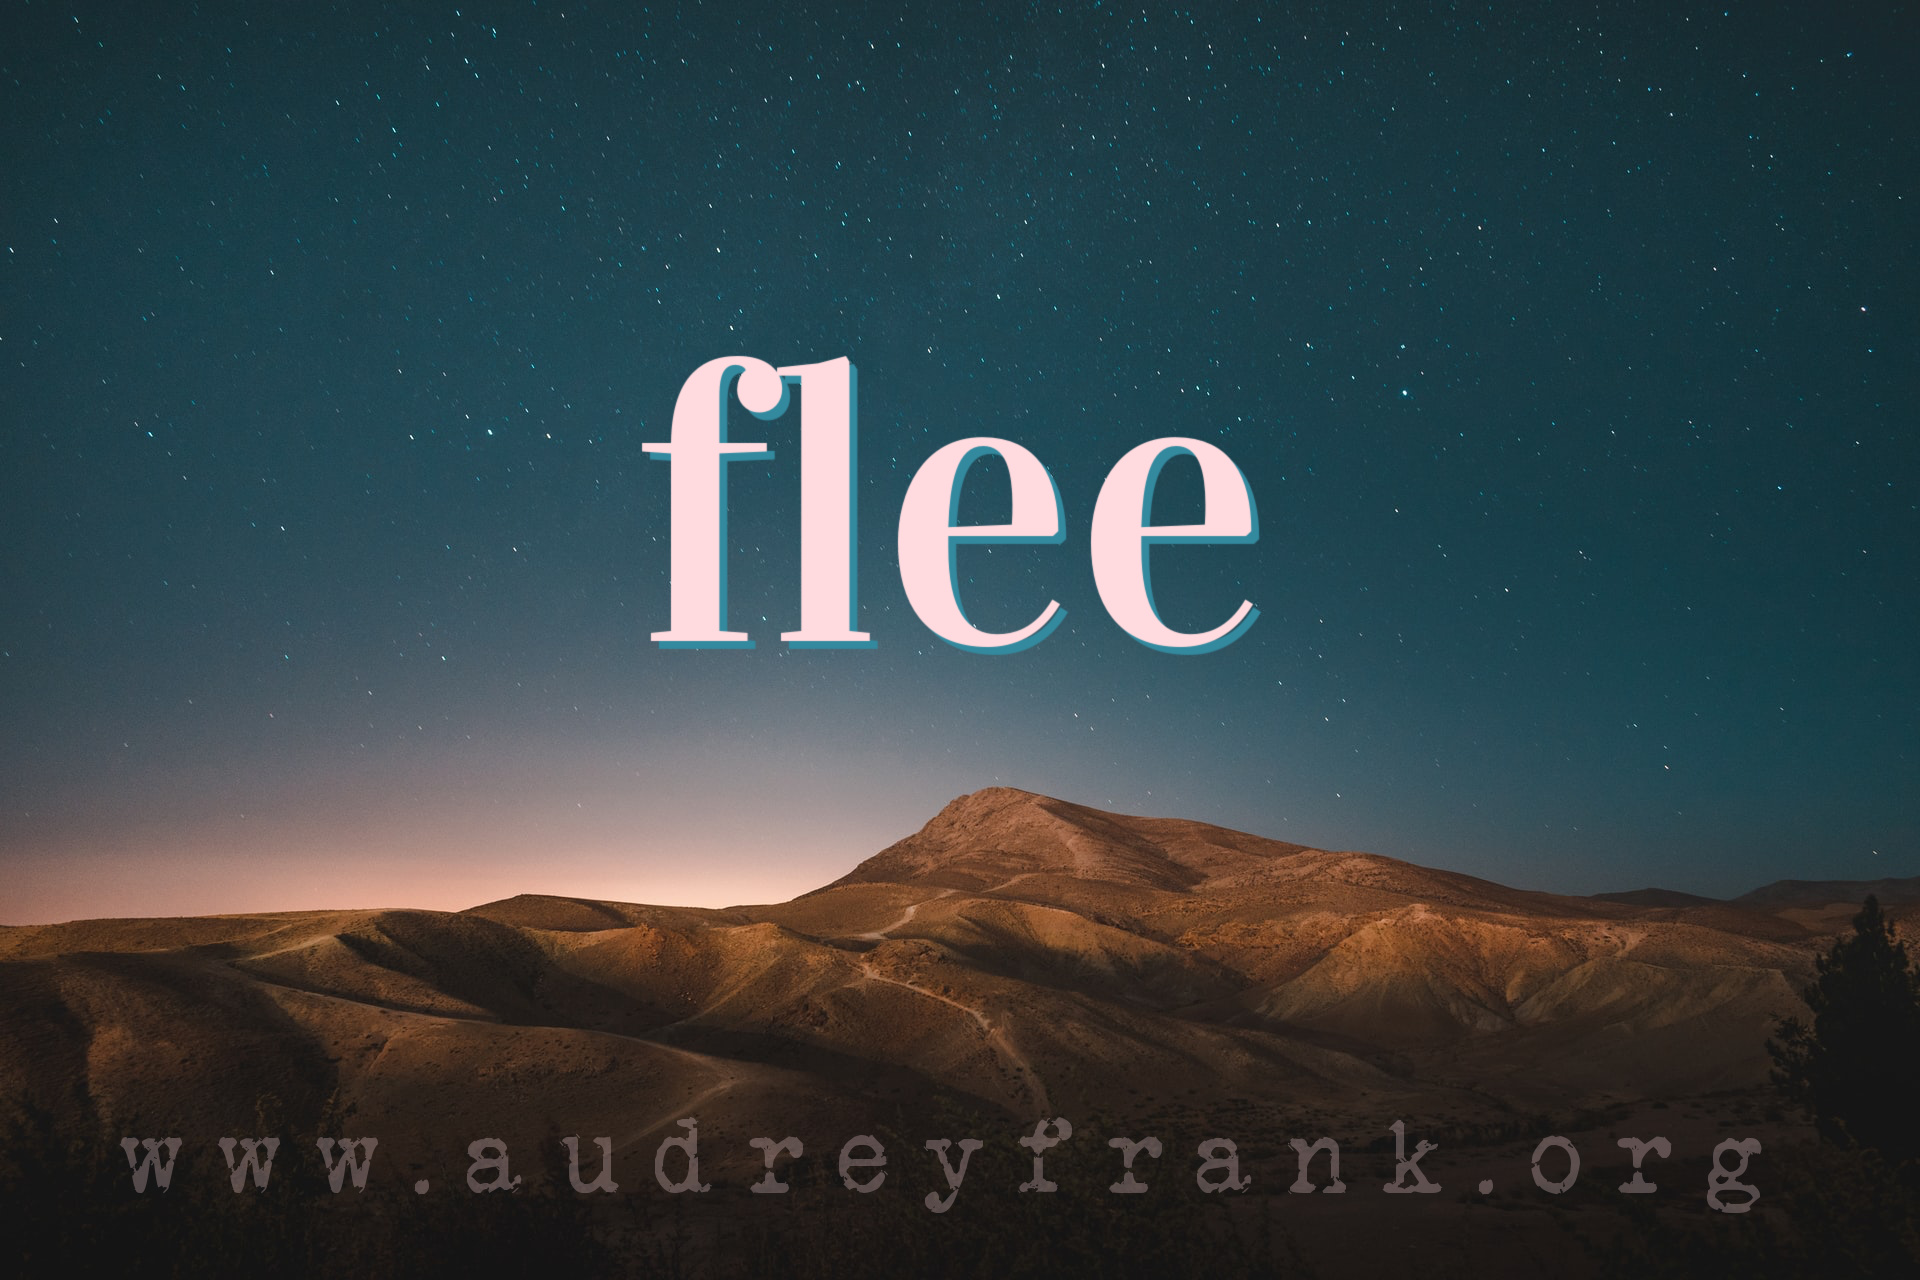 A picture of the desert at night with the word "Flee" describing the subject of the post.